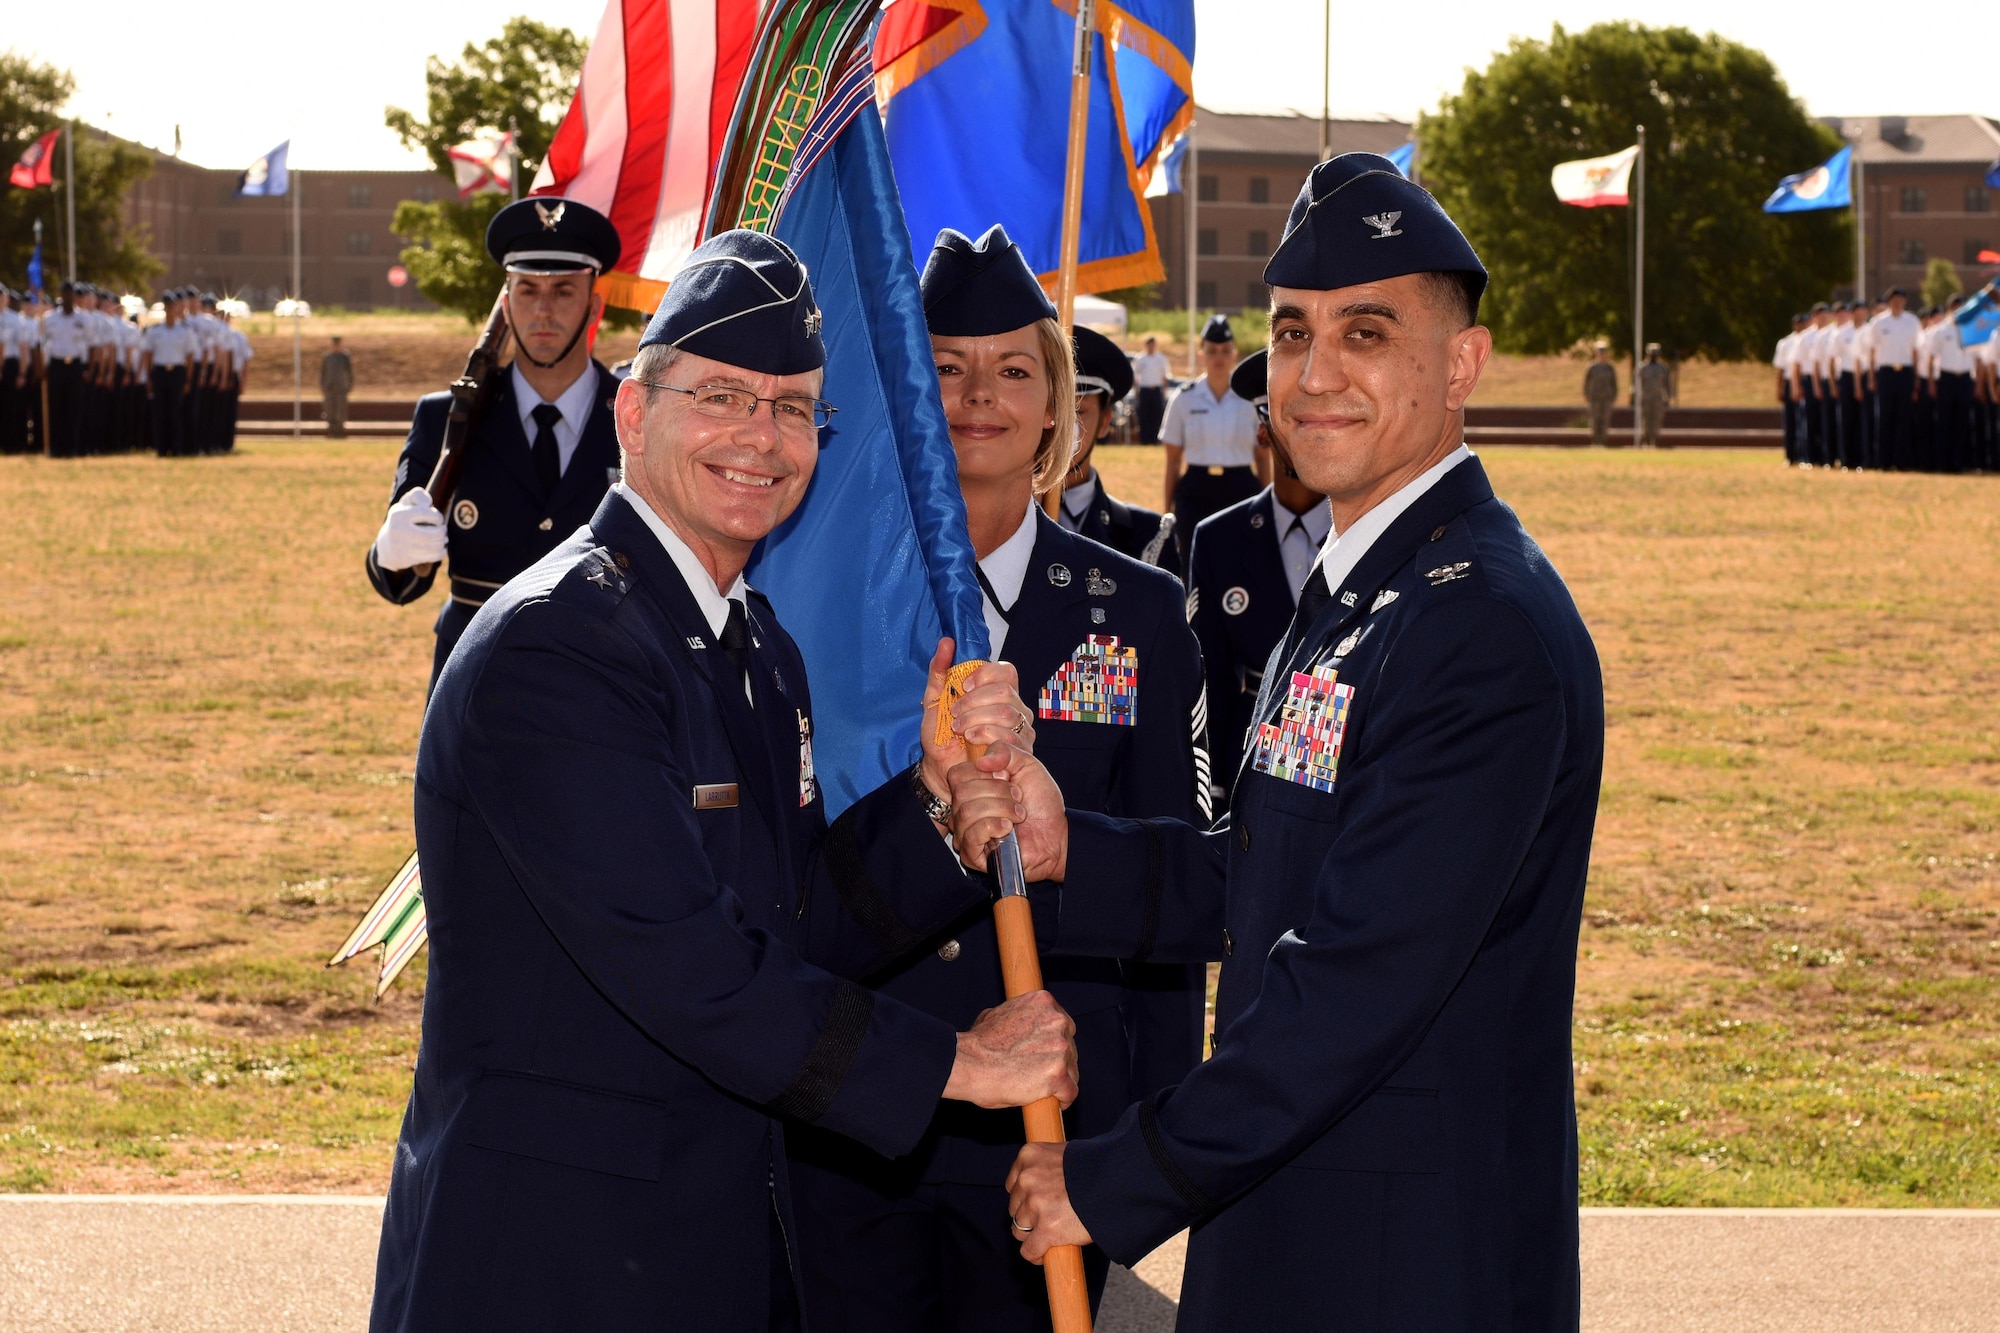 U.S. Air Force Maj. Gen. Robert LaBrutta, 2nd Air Force Commander, passes the guideon to Col. Ricky Mills, 17th Training Wing Commander, at the parade field on Goodfellow Air Force Base, Texas, July 21, 2017. Mills commanded the 17TRW from July 2017 until June 2019. (U.S. Air Force photo by Airman 1st Class Randall Moose/Released)